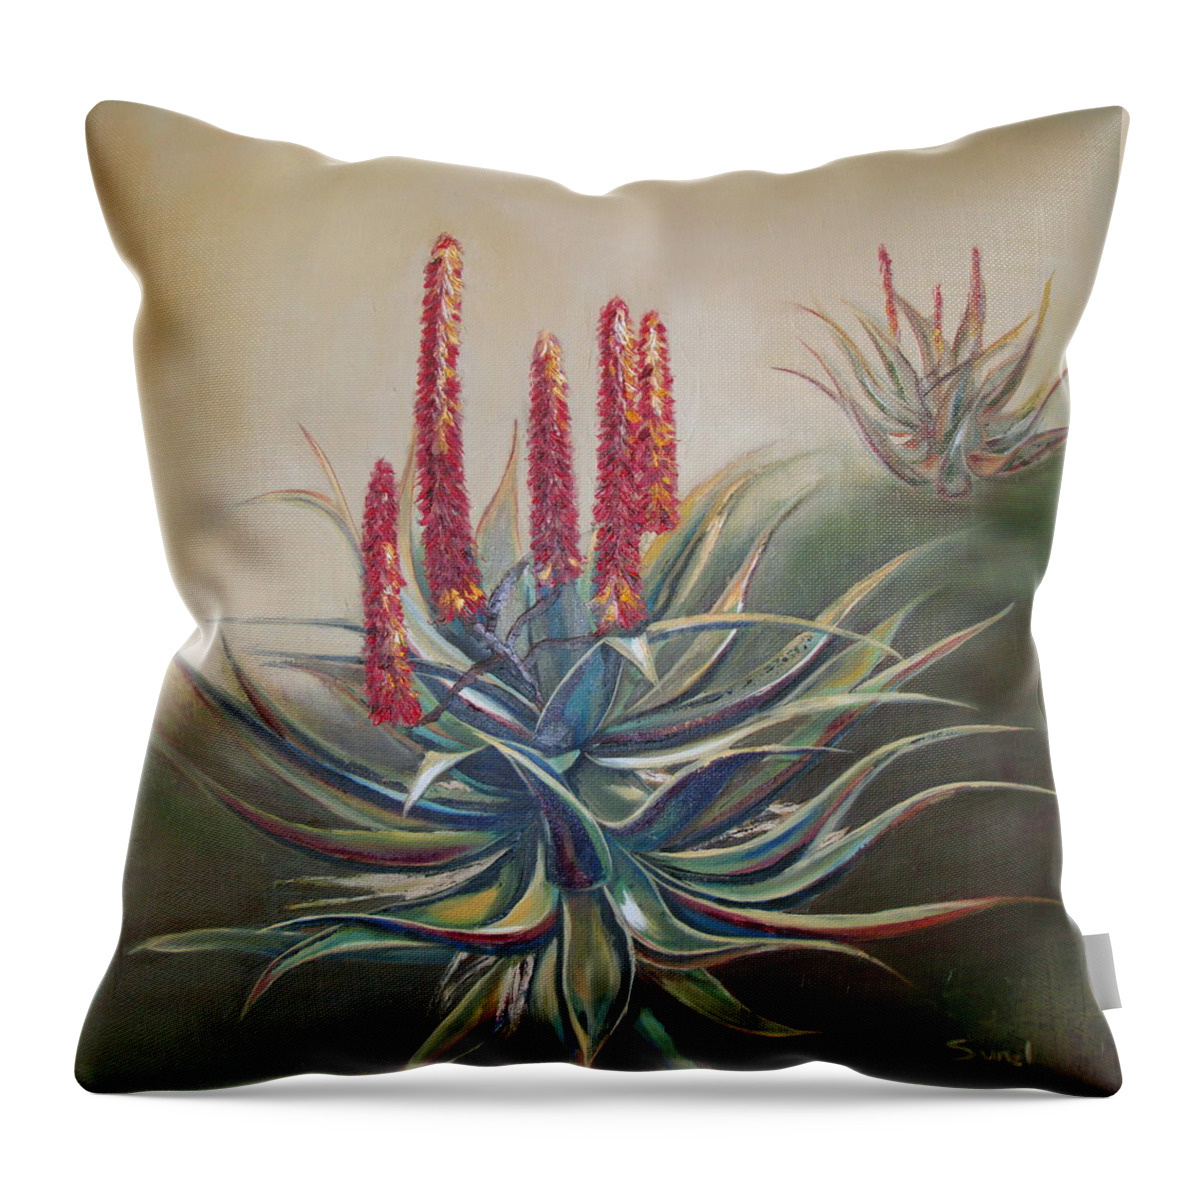 Aloe Throw Pillow featuring the painting More Aloes by Sunel De Lange